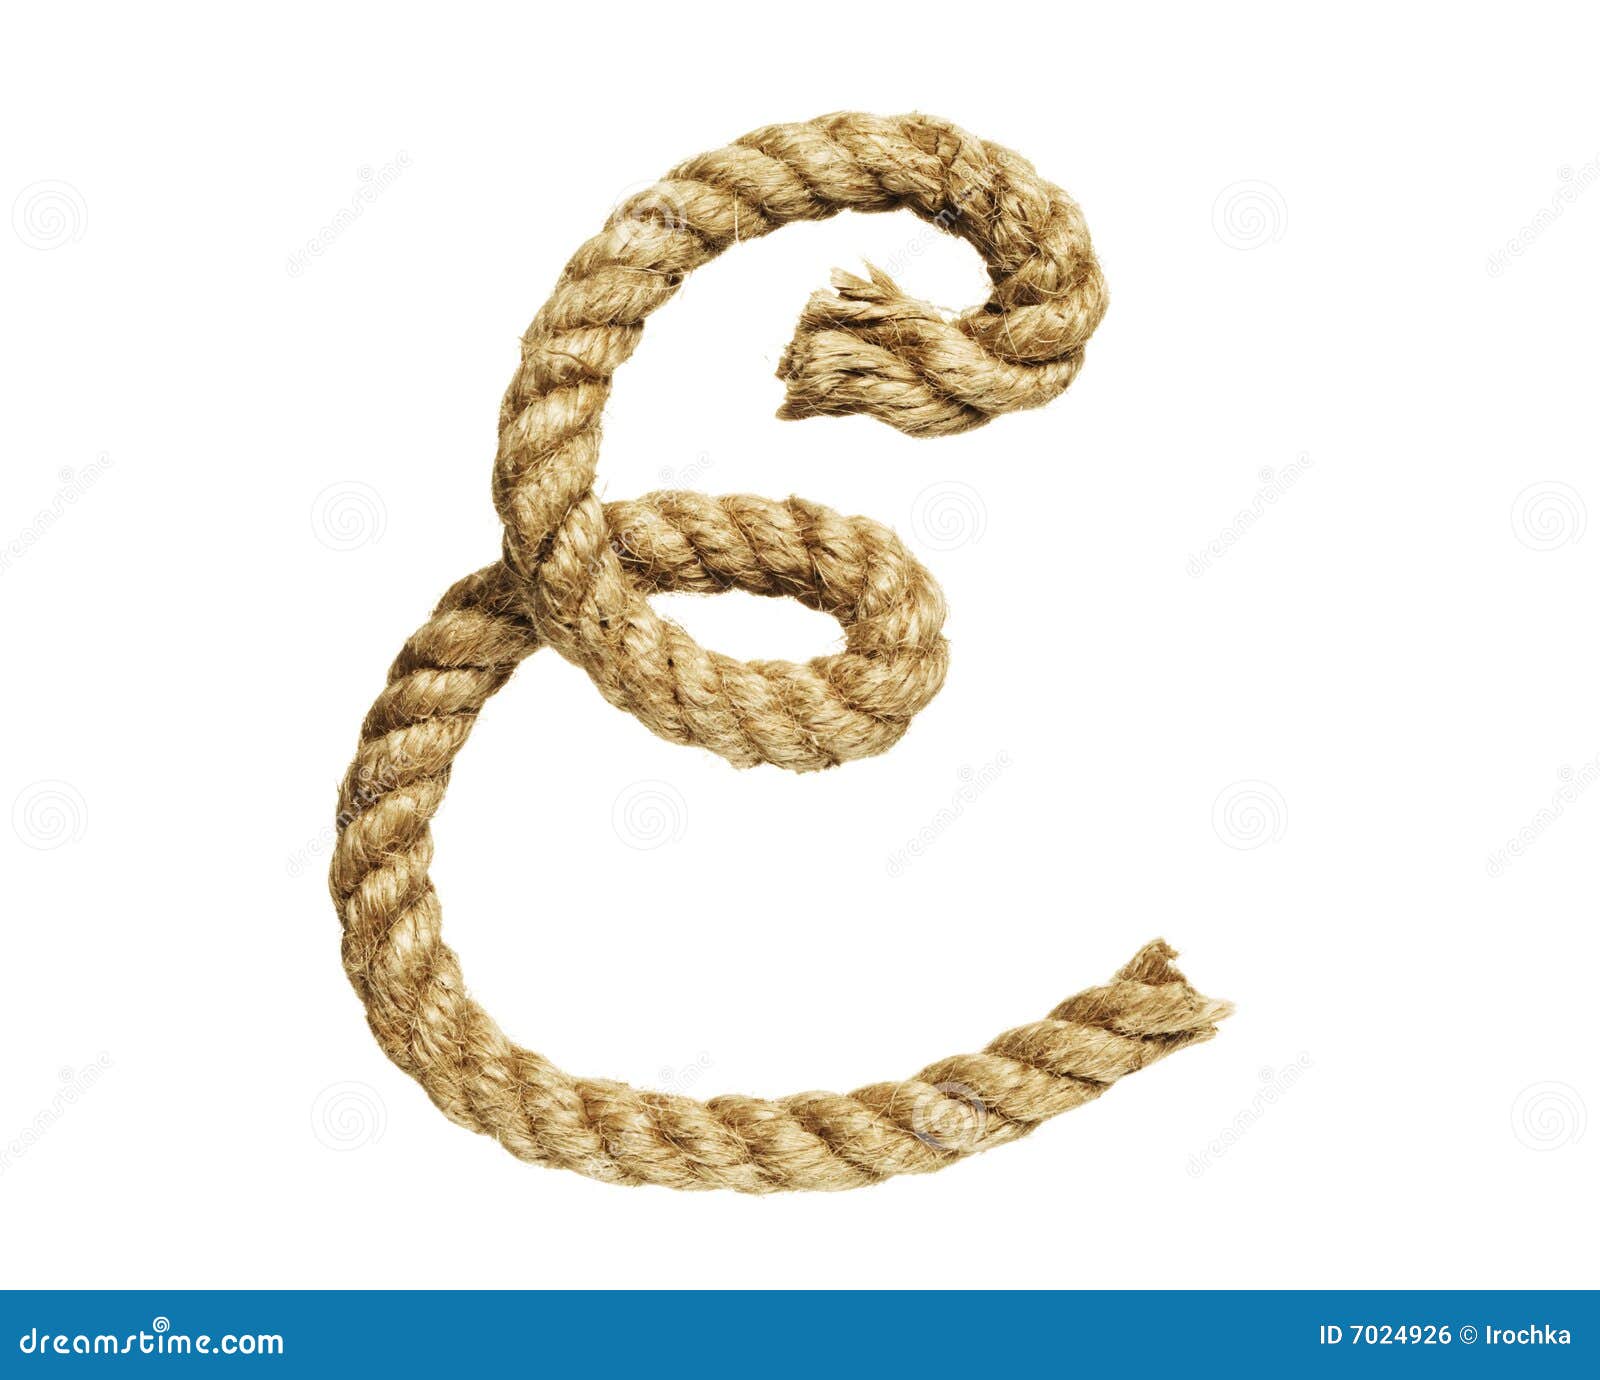 rope forming letter e